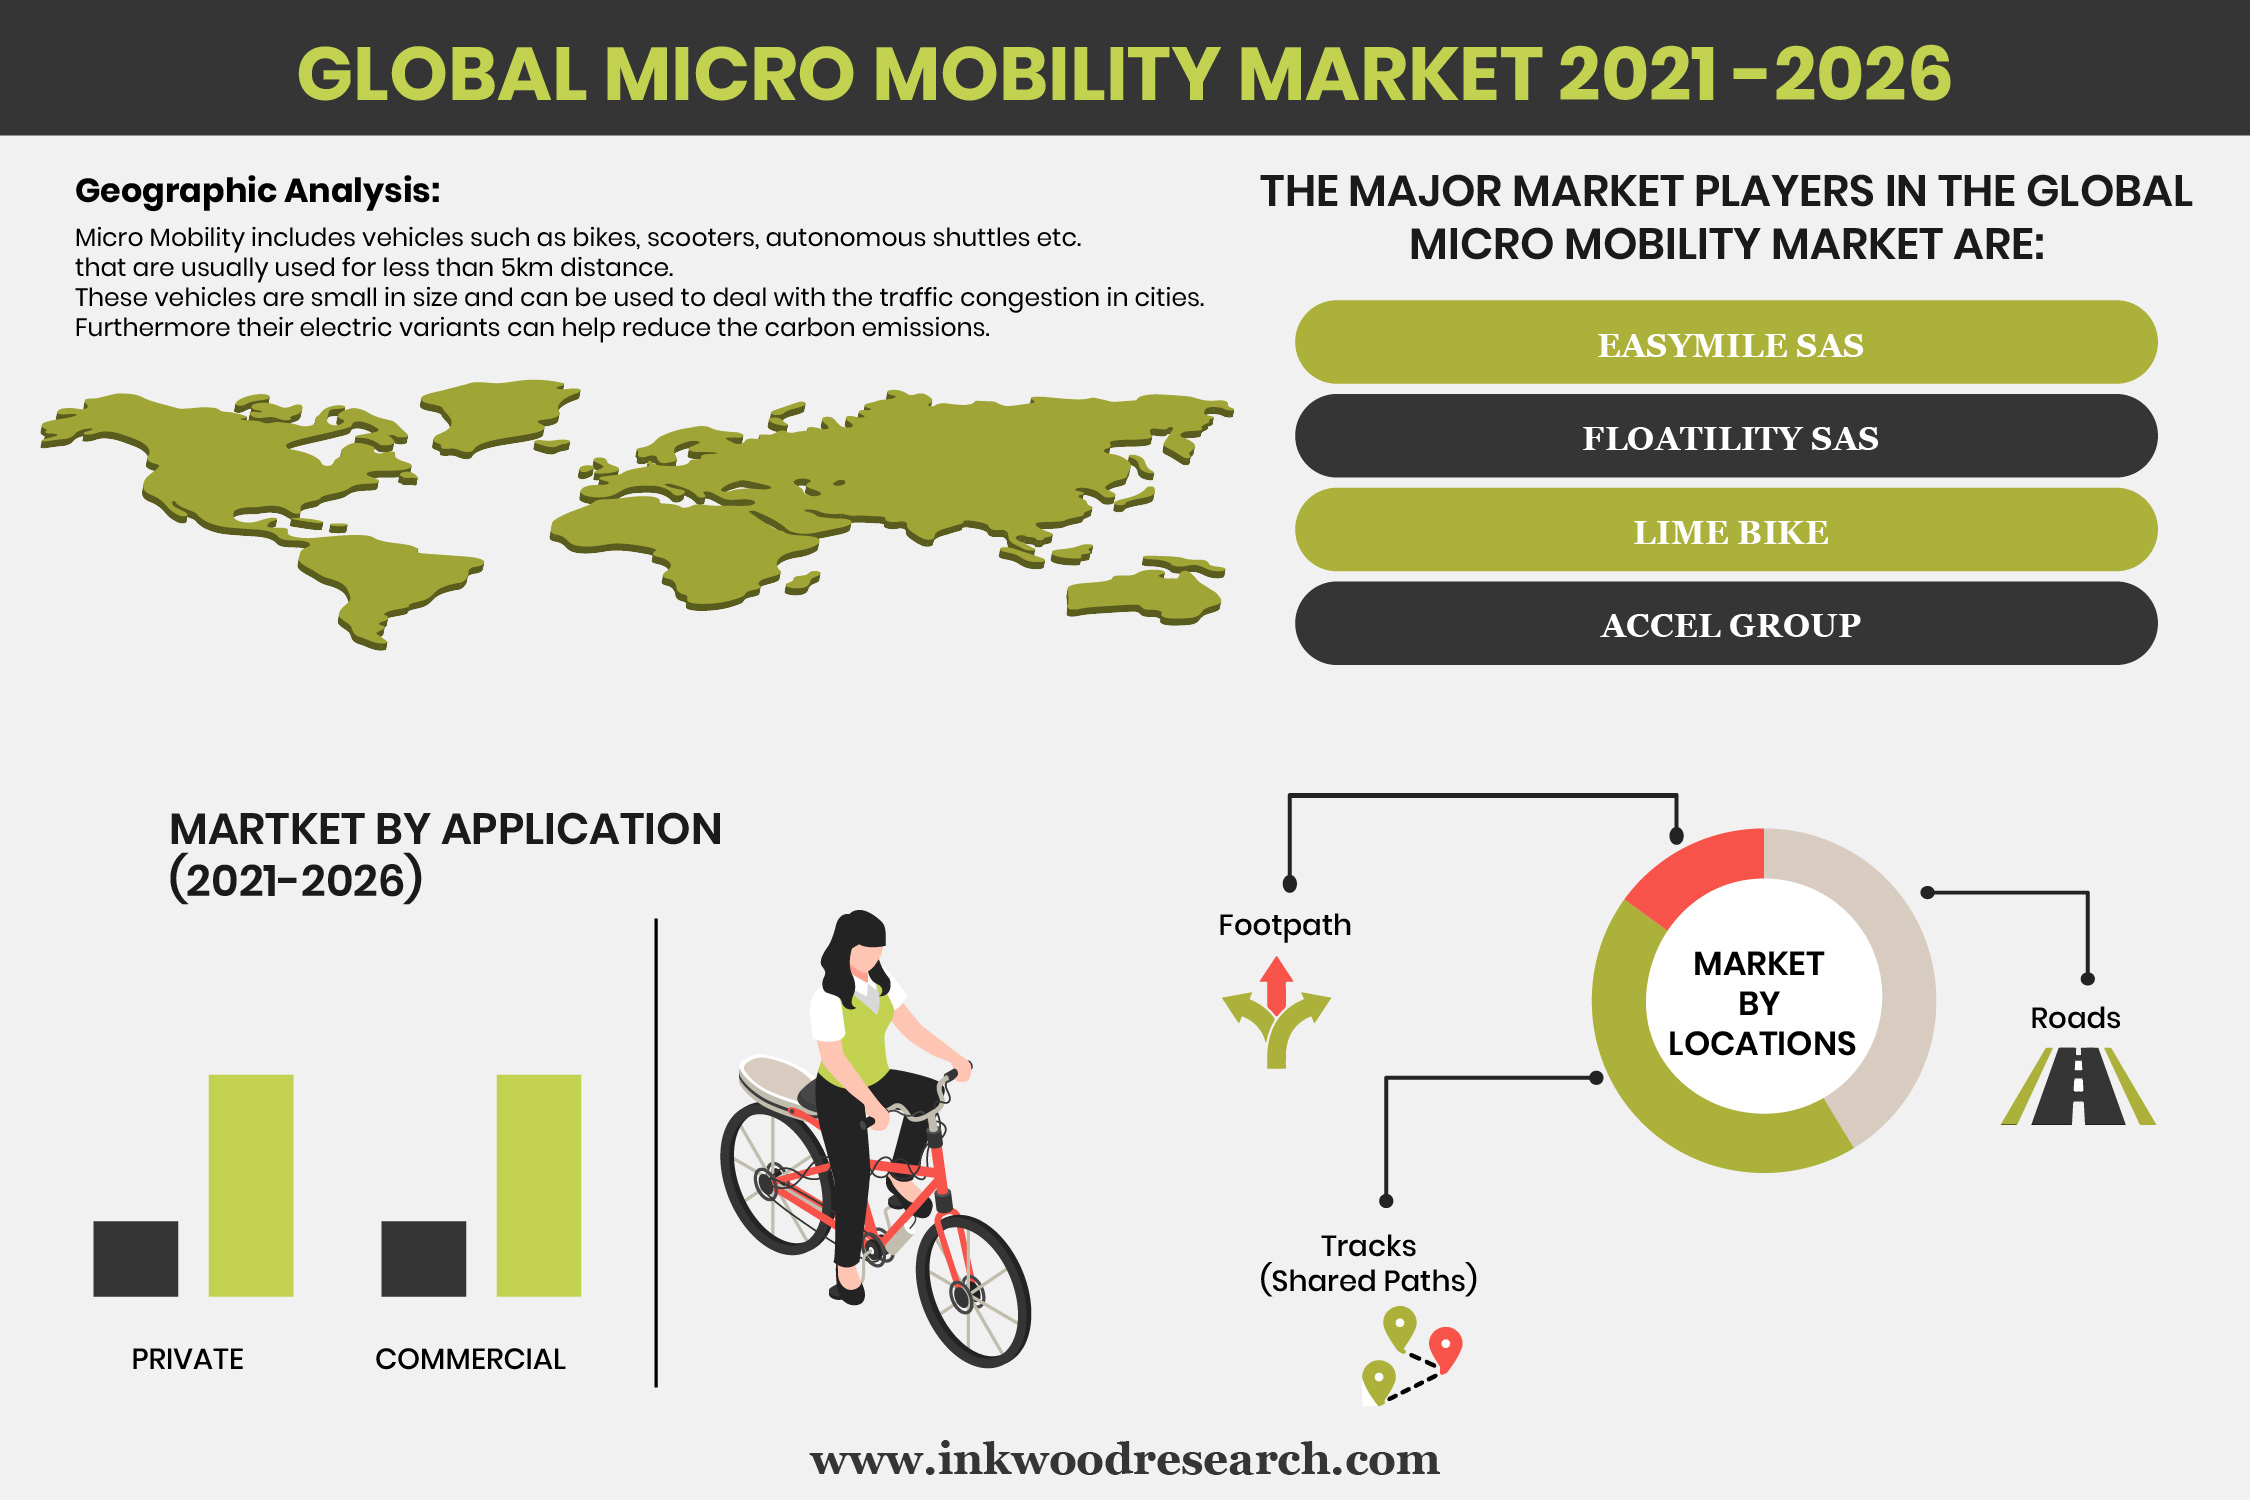 Increasing Congestion of Cities to Accelerate the Global Micro Mobility Market Growth